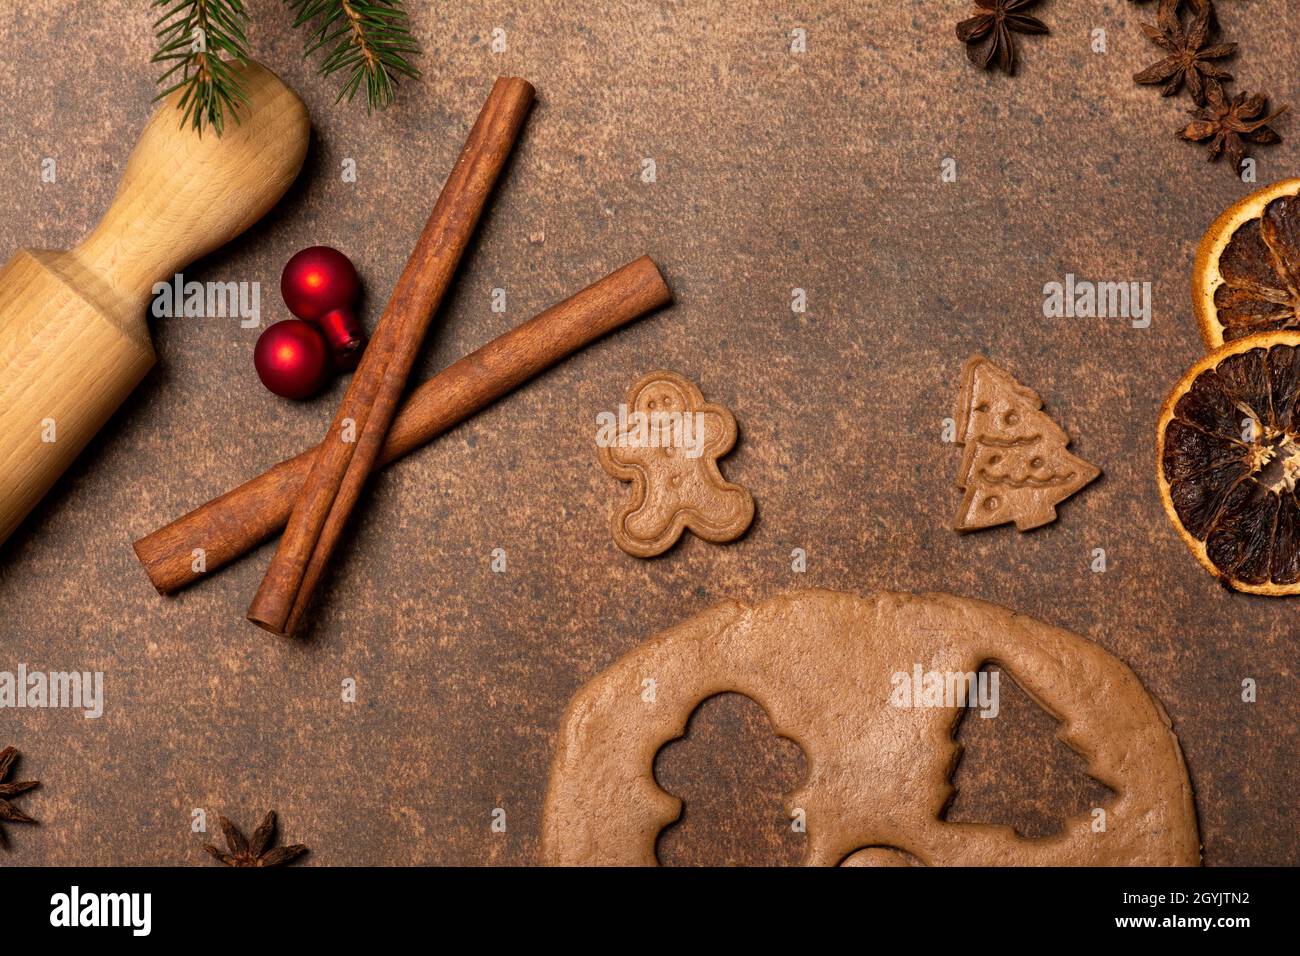 Gingerbread dough, a gingerbread man cookie, a Christmas tree cookie, a rolling pin, spices, red Christmas tree ornaments. Holidays are coming. Stock Photo